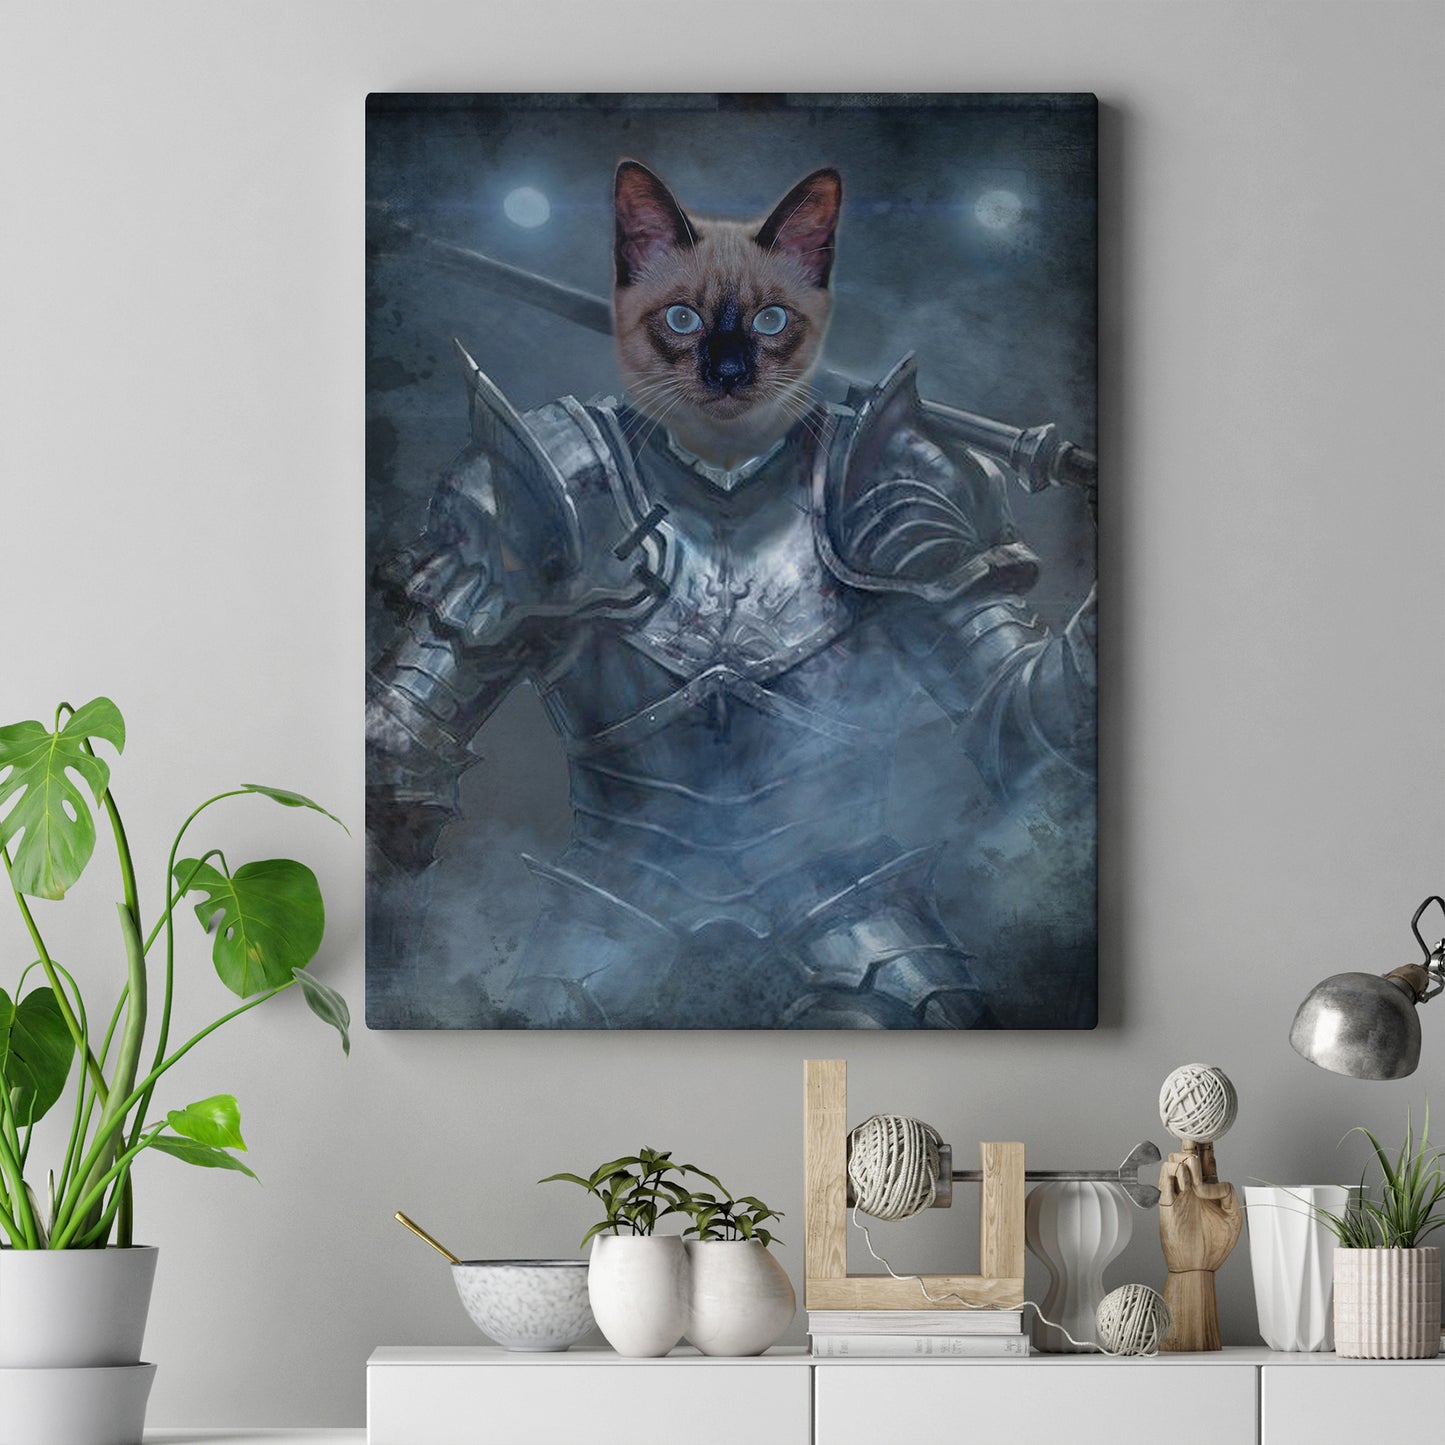 Pet Medieval Knight Portrait - Birman Cat | Customizable Canvas - Image by Tailored Canvases